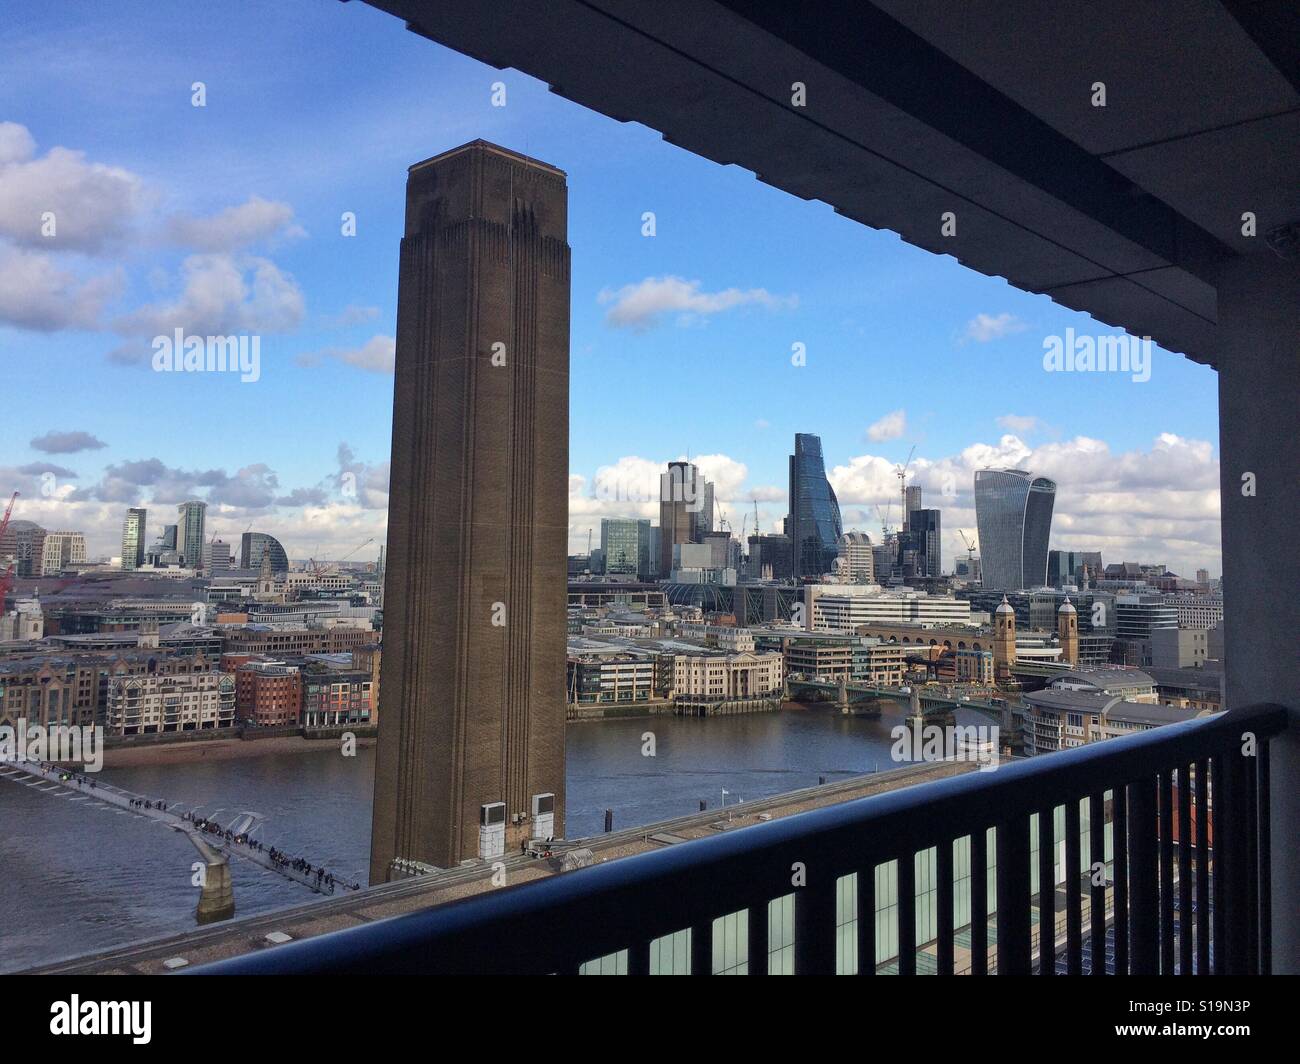 England, UK. City of London financial district as seen from the Tate Modern Gallery. Stock Photo